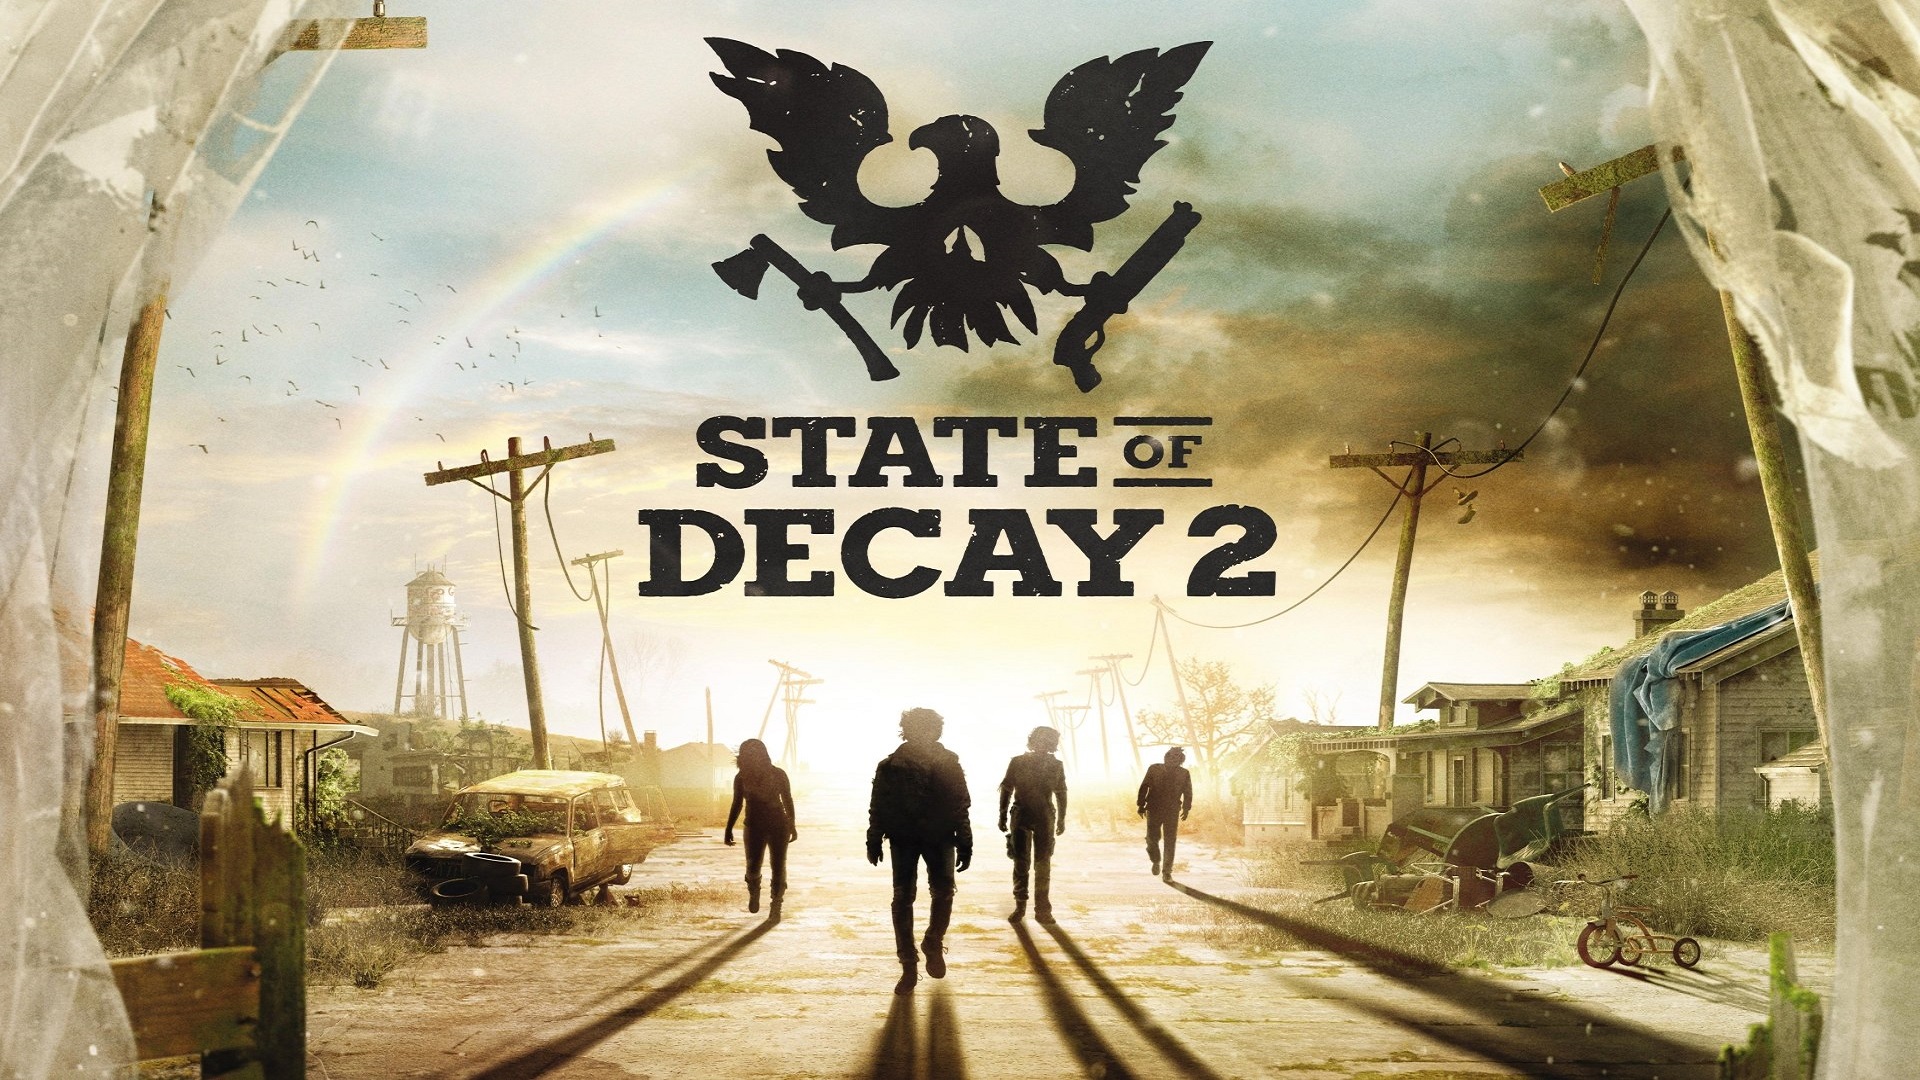 State-of-Decay-2-Cover-Art.jpg